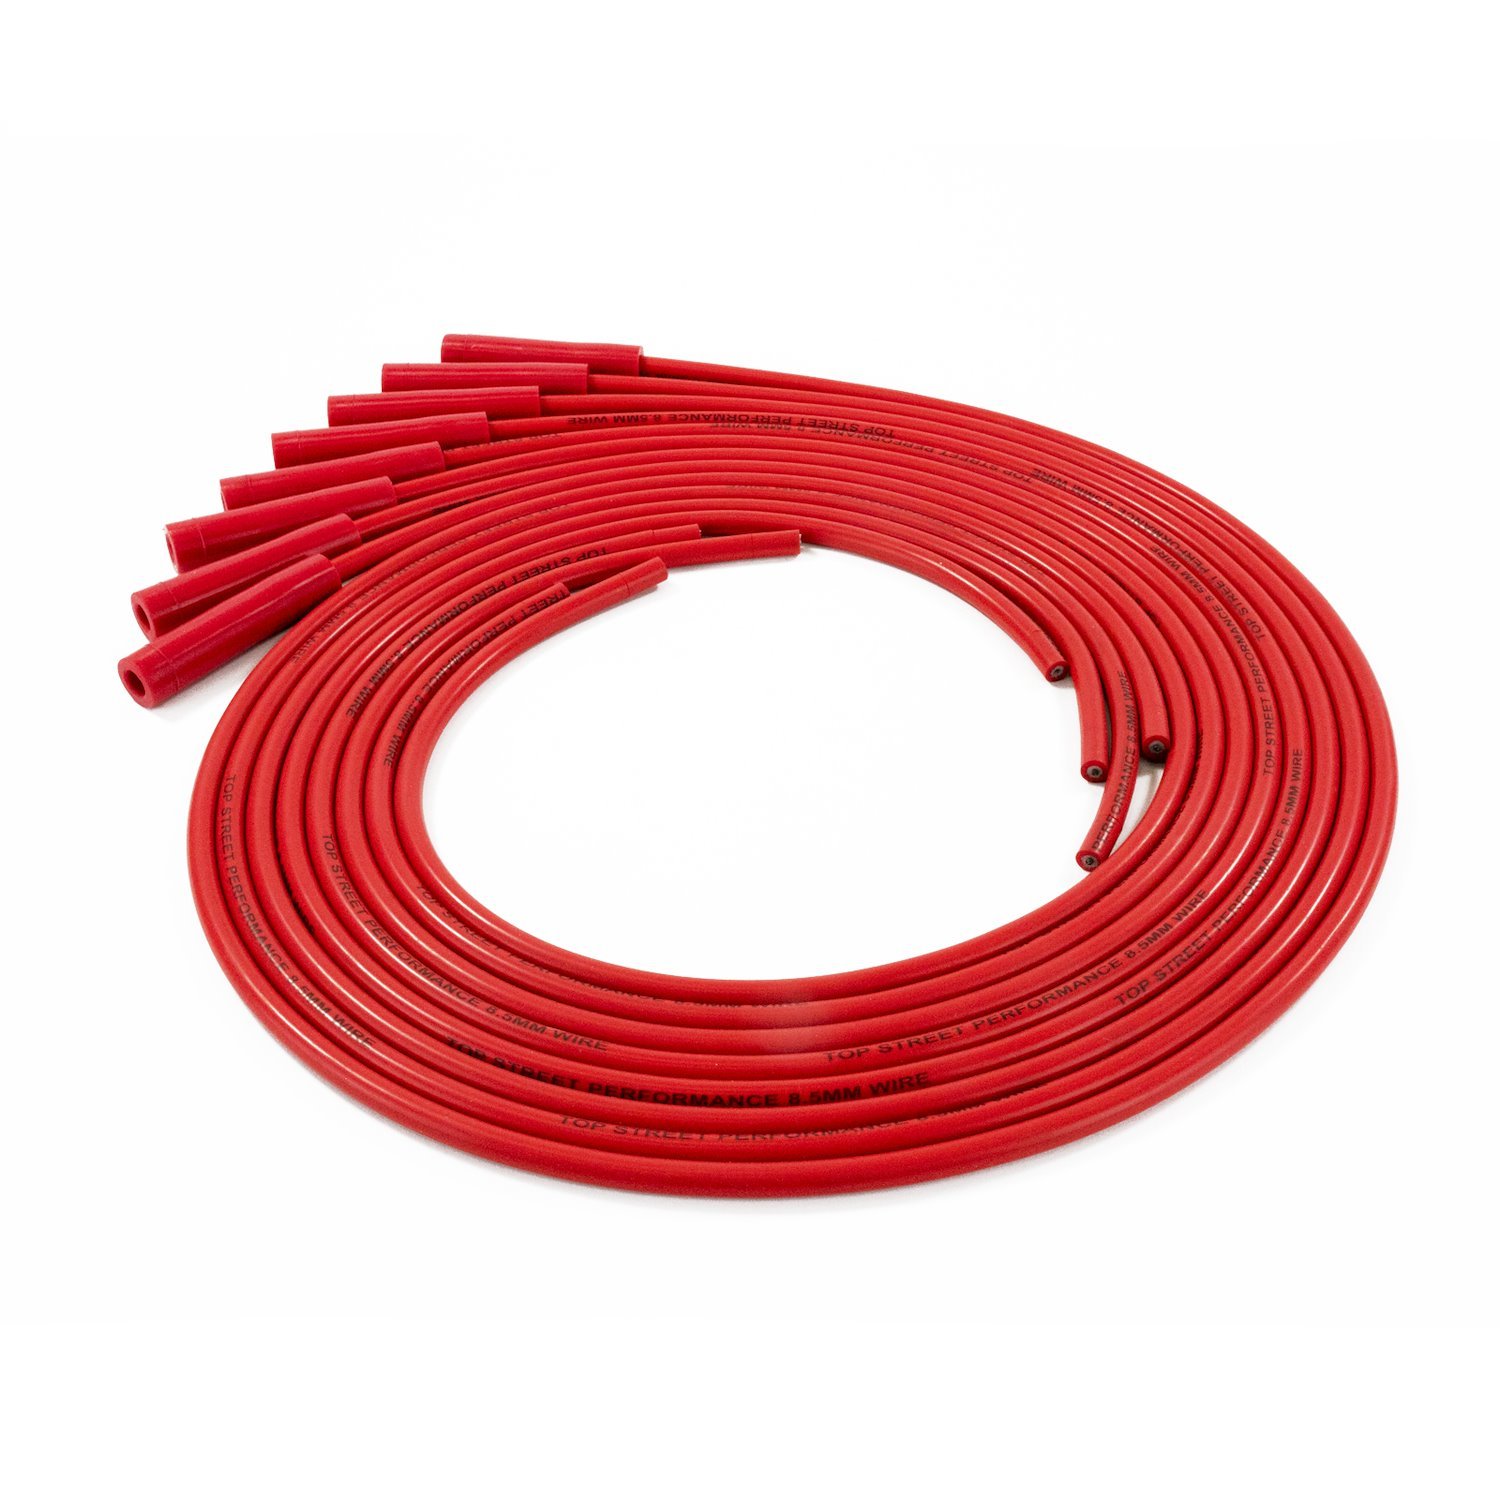 85280 Universal Ignition Wires, 8.5mm Red, Straight Plug Boots